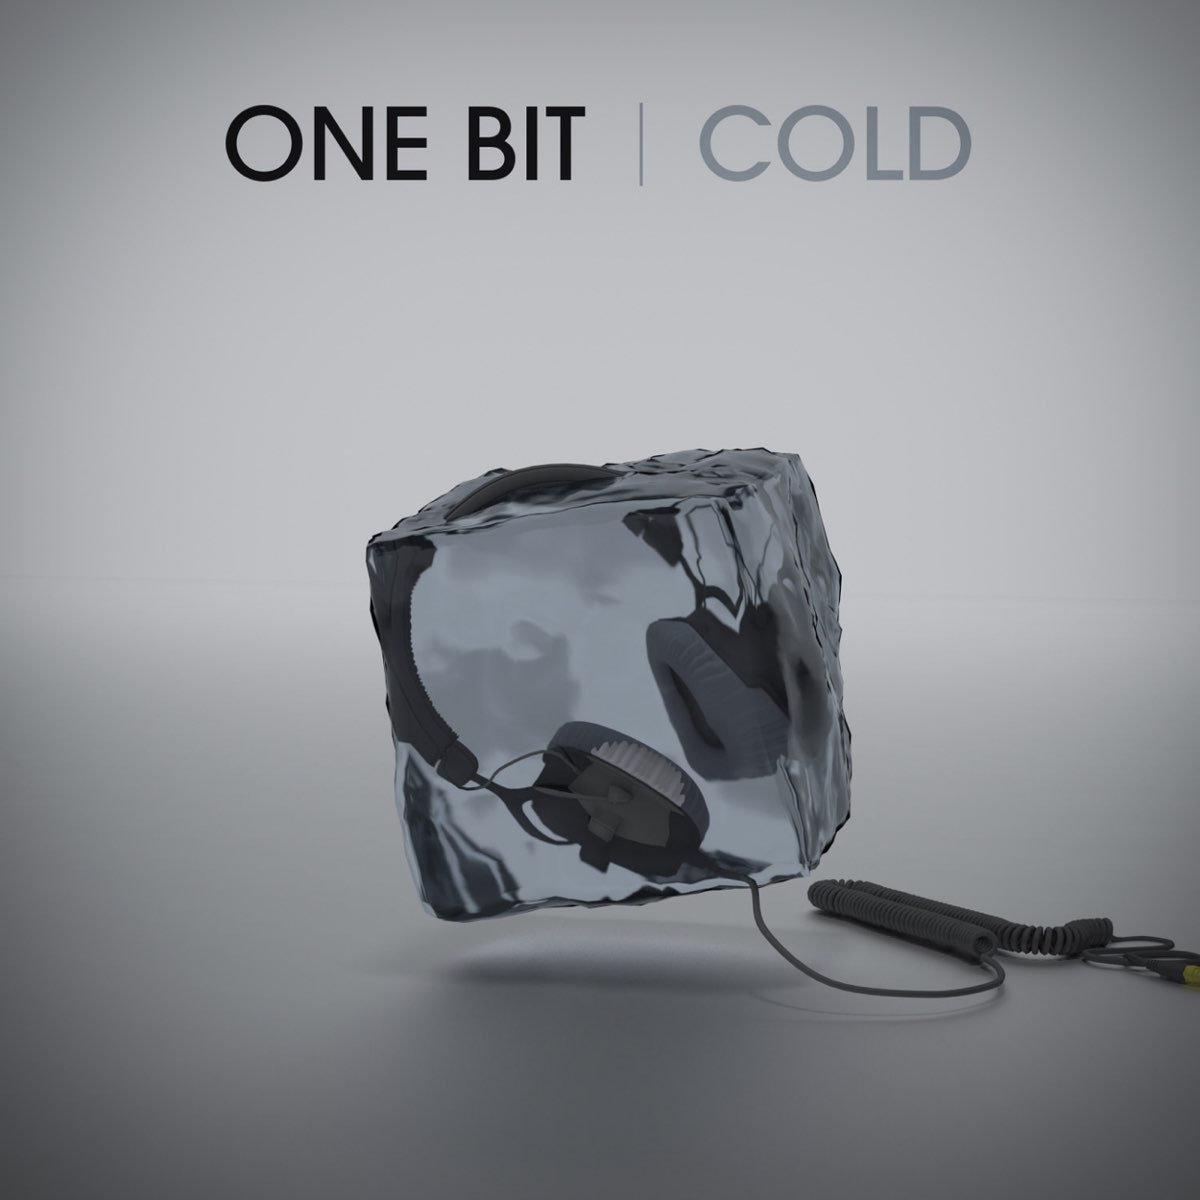 Cold first. One bit. Cold Loner Tape. Cold Culture - Cold (Single). Картинка холод 1bit.